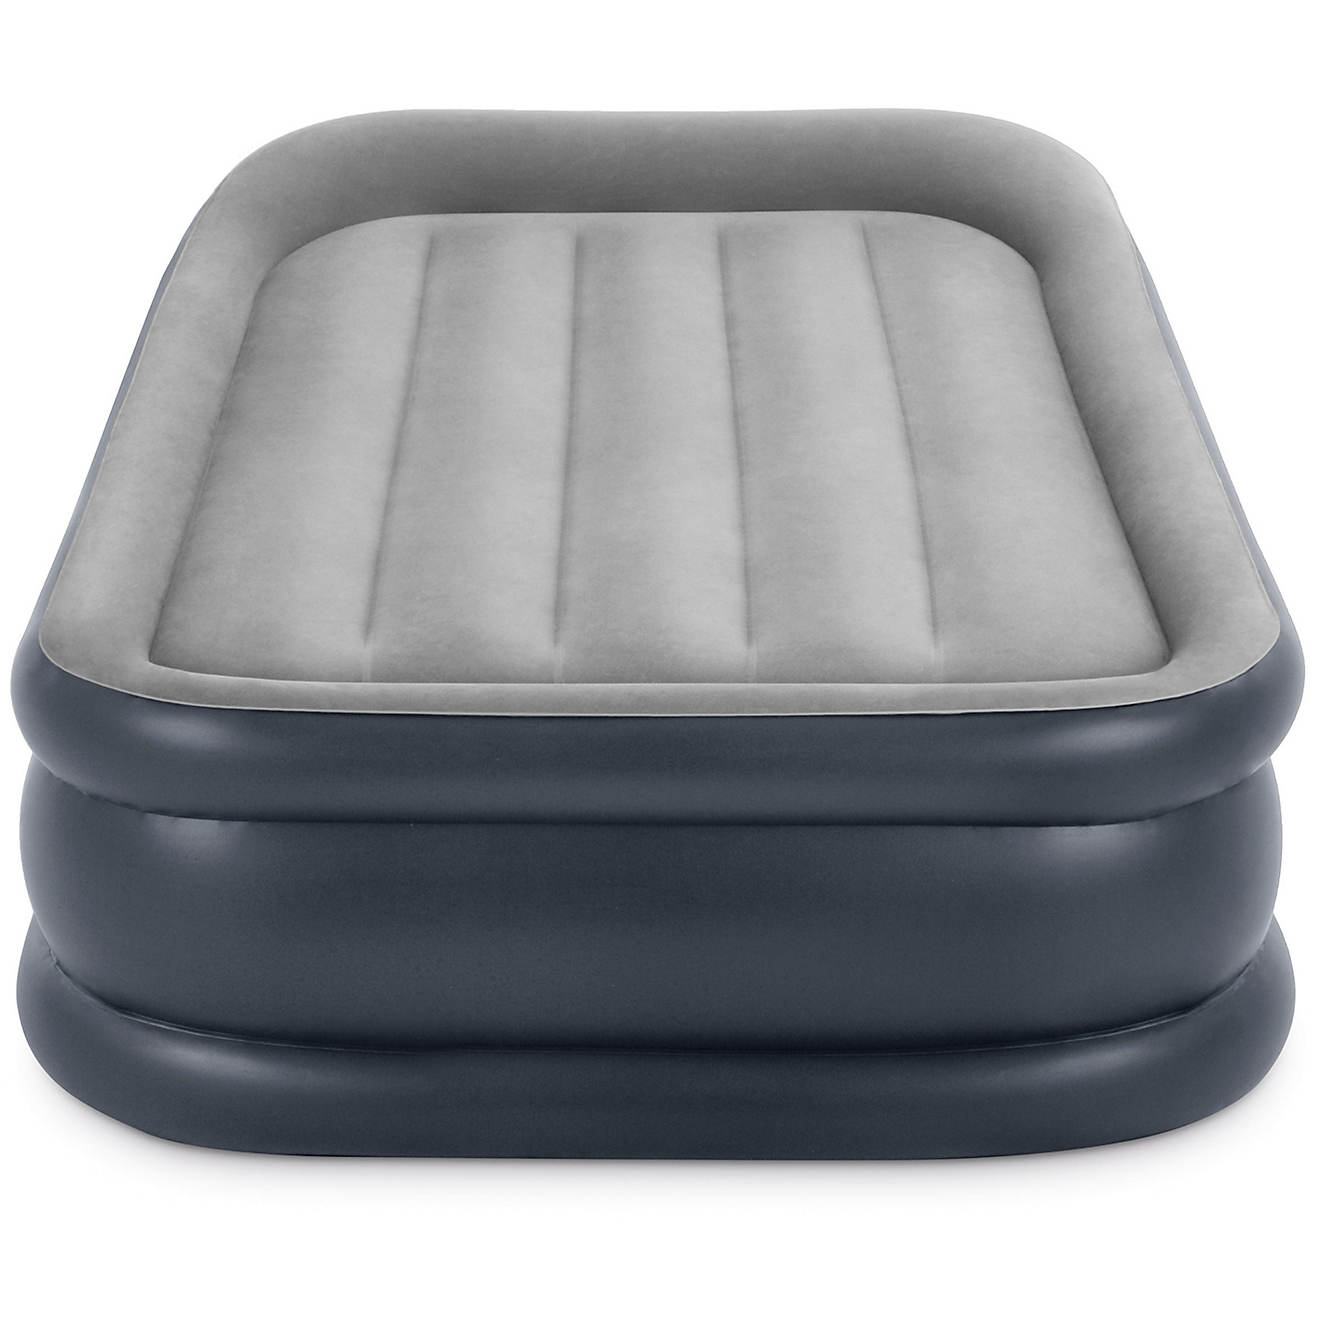 INTEX Dura-Beam Plus Twin Deluxe Pillow Rest Airbed                                                                              - view number 1